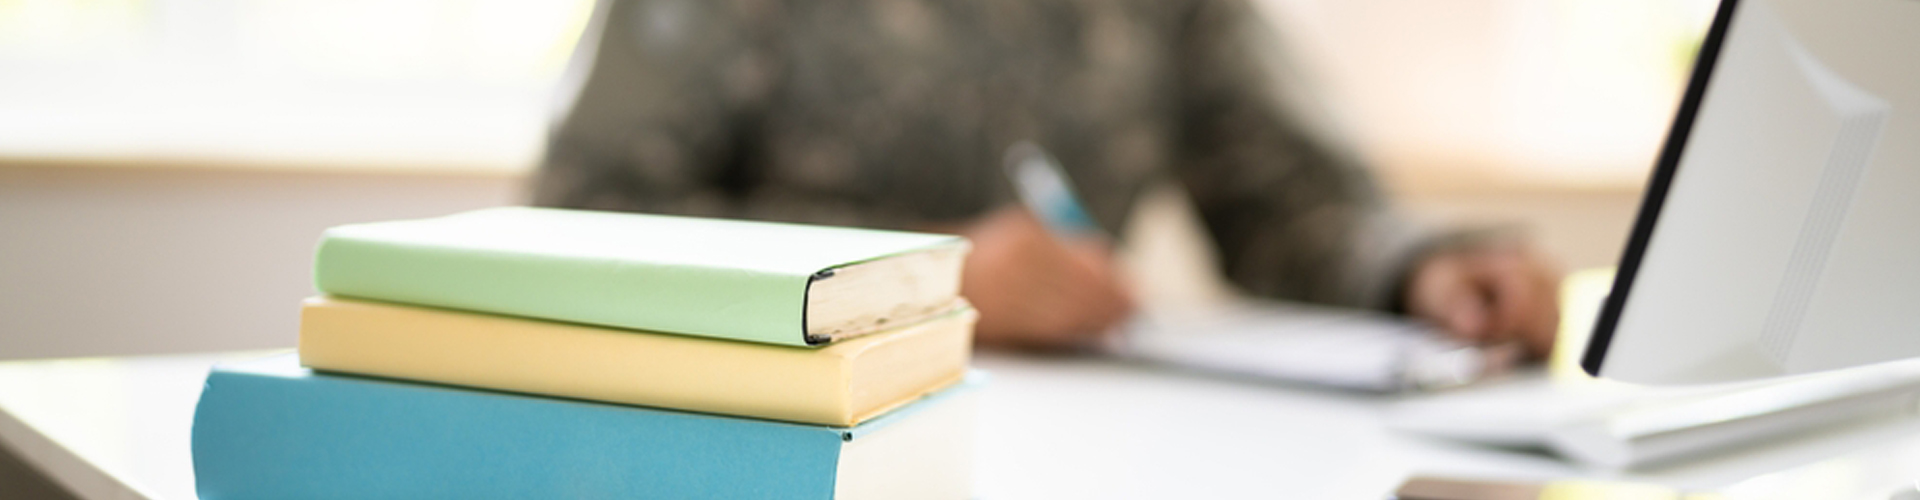 How to Use the GI Bill for College: Taking the Next Step in Your Civilian & Professional Life